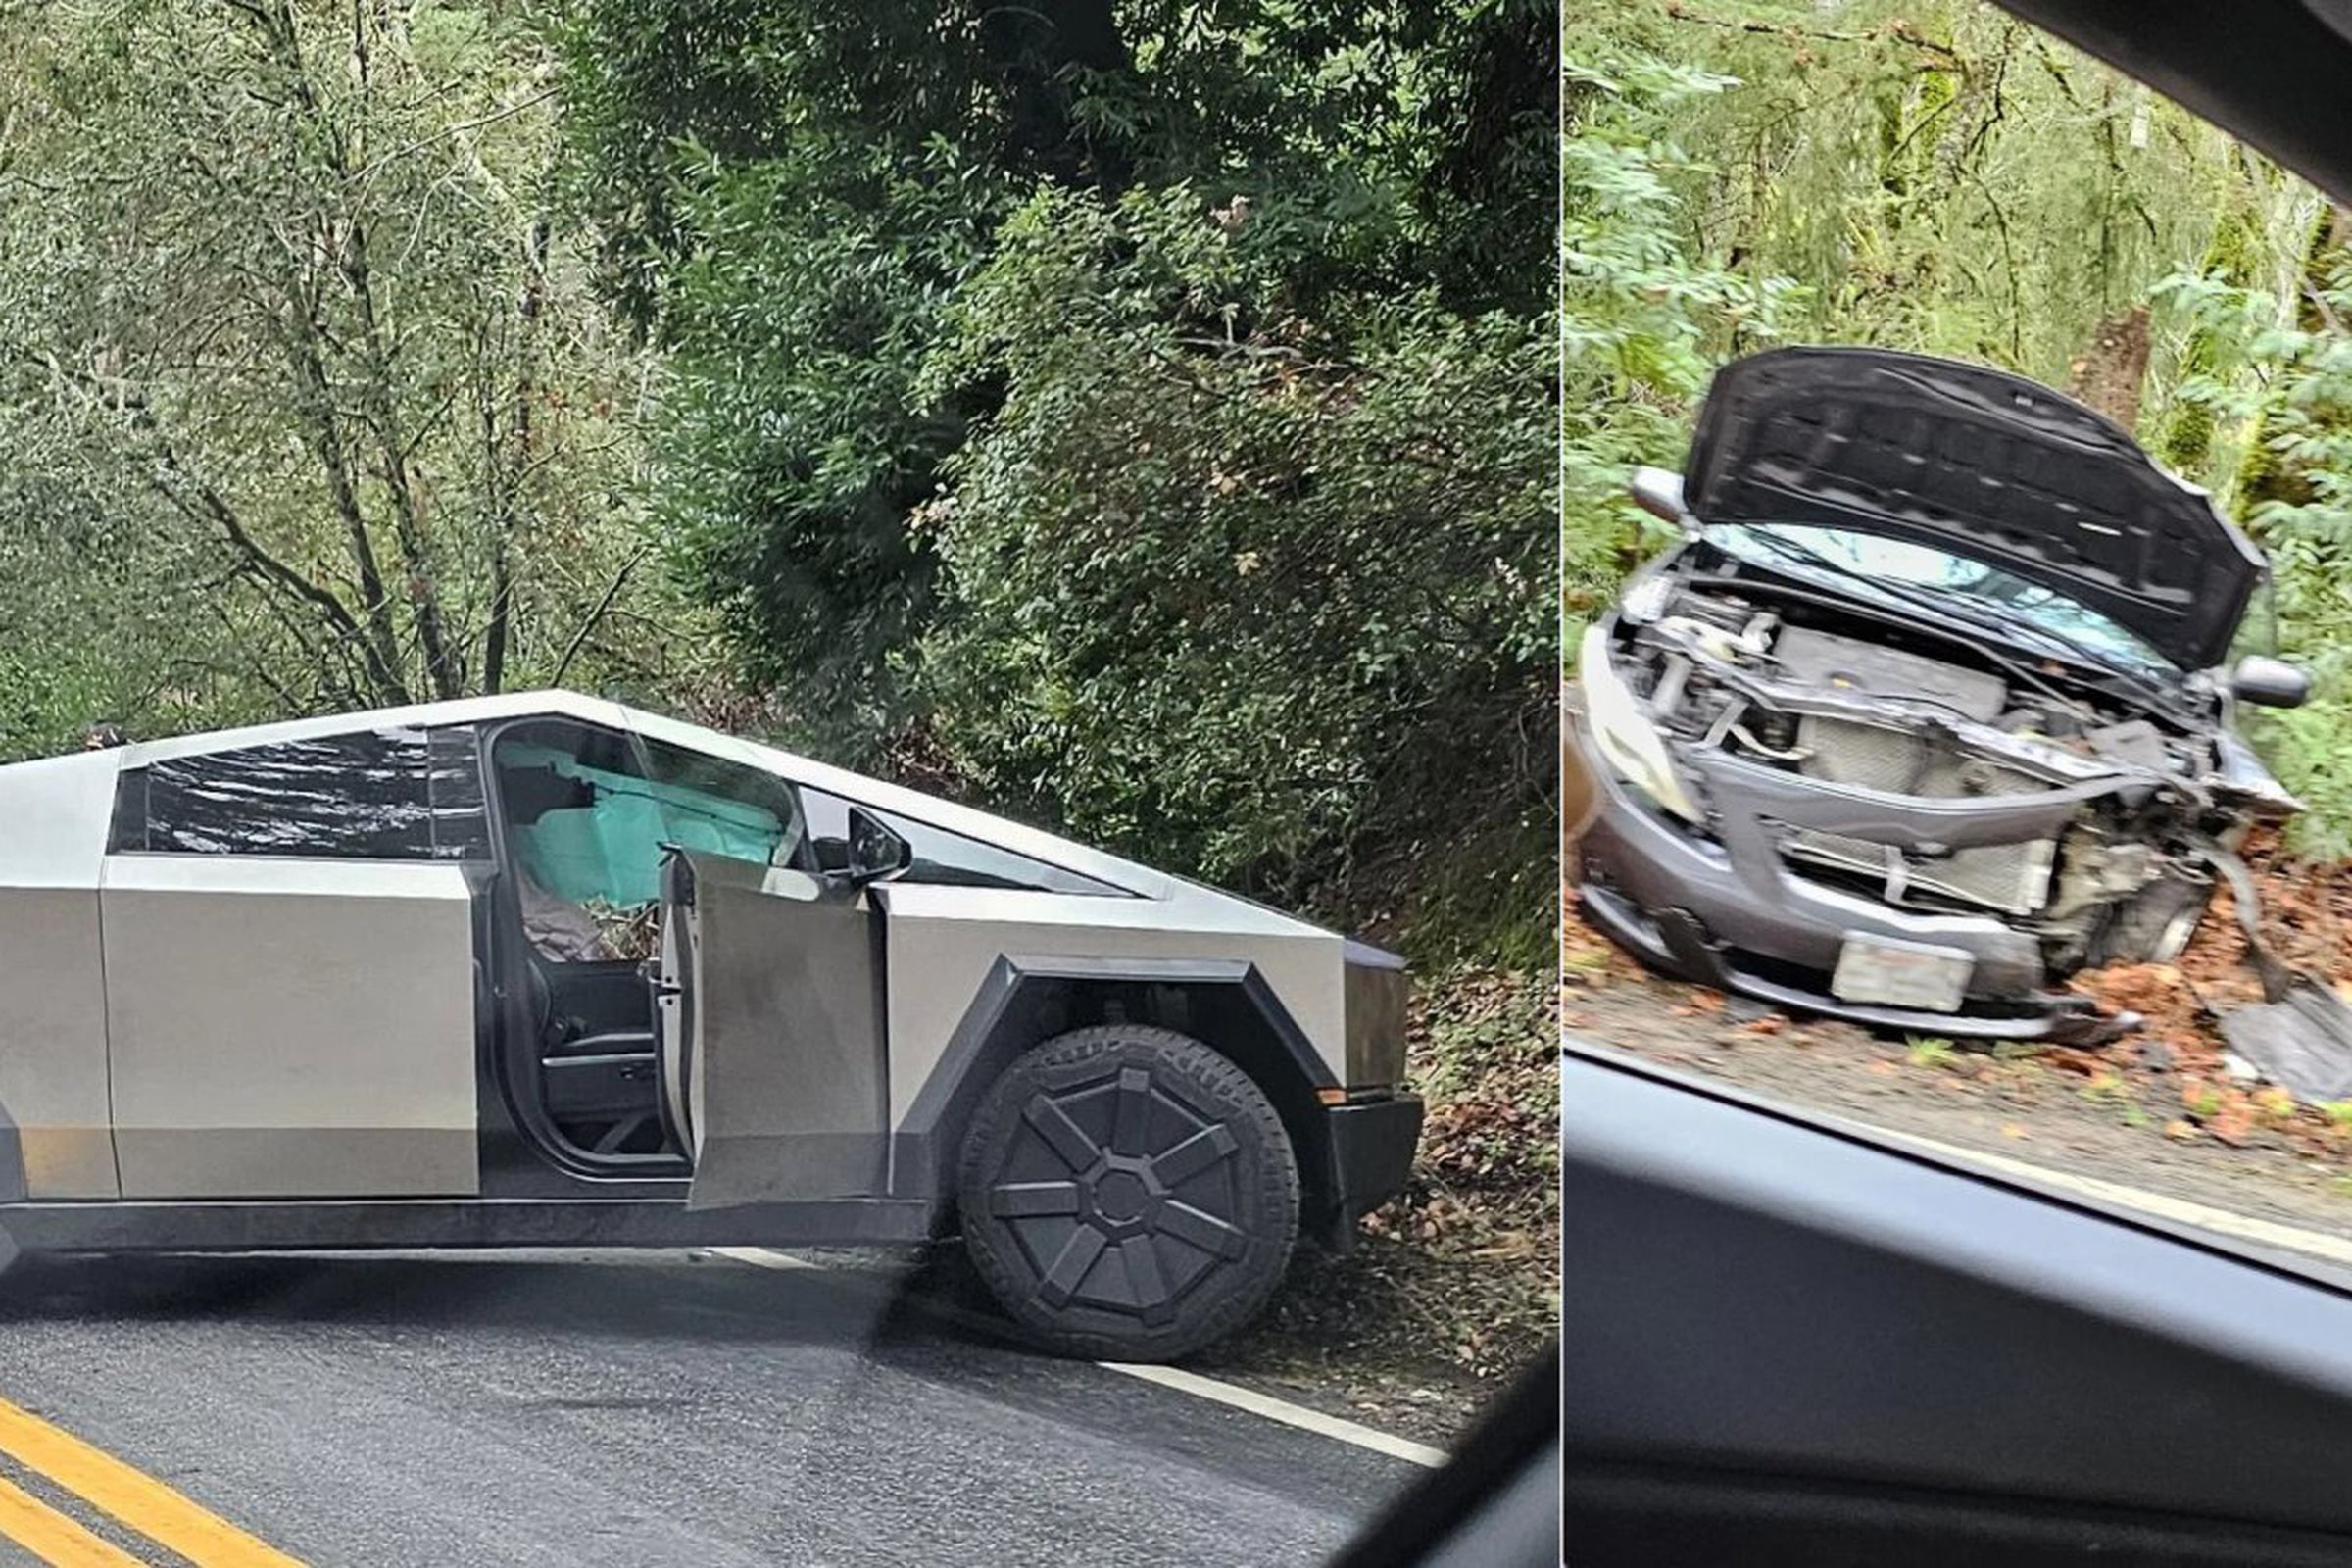 Front-on image of a Toyota Corolla that was in an accident showing significant front end damage and raised hood, as well as a picture from the side of a Tesla Cybertruck with the doors open and airbags deployed.